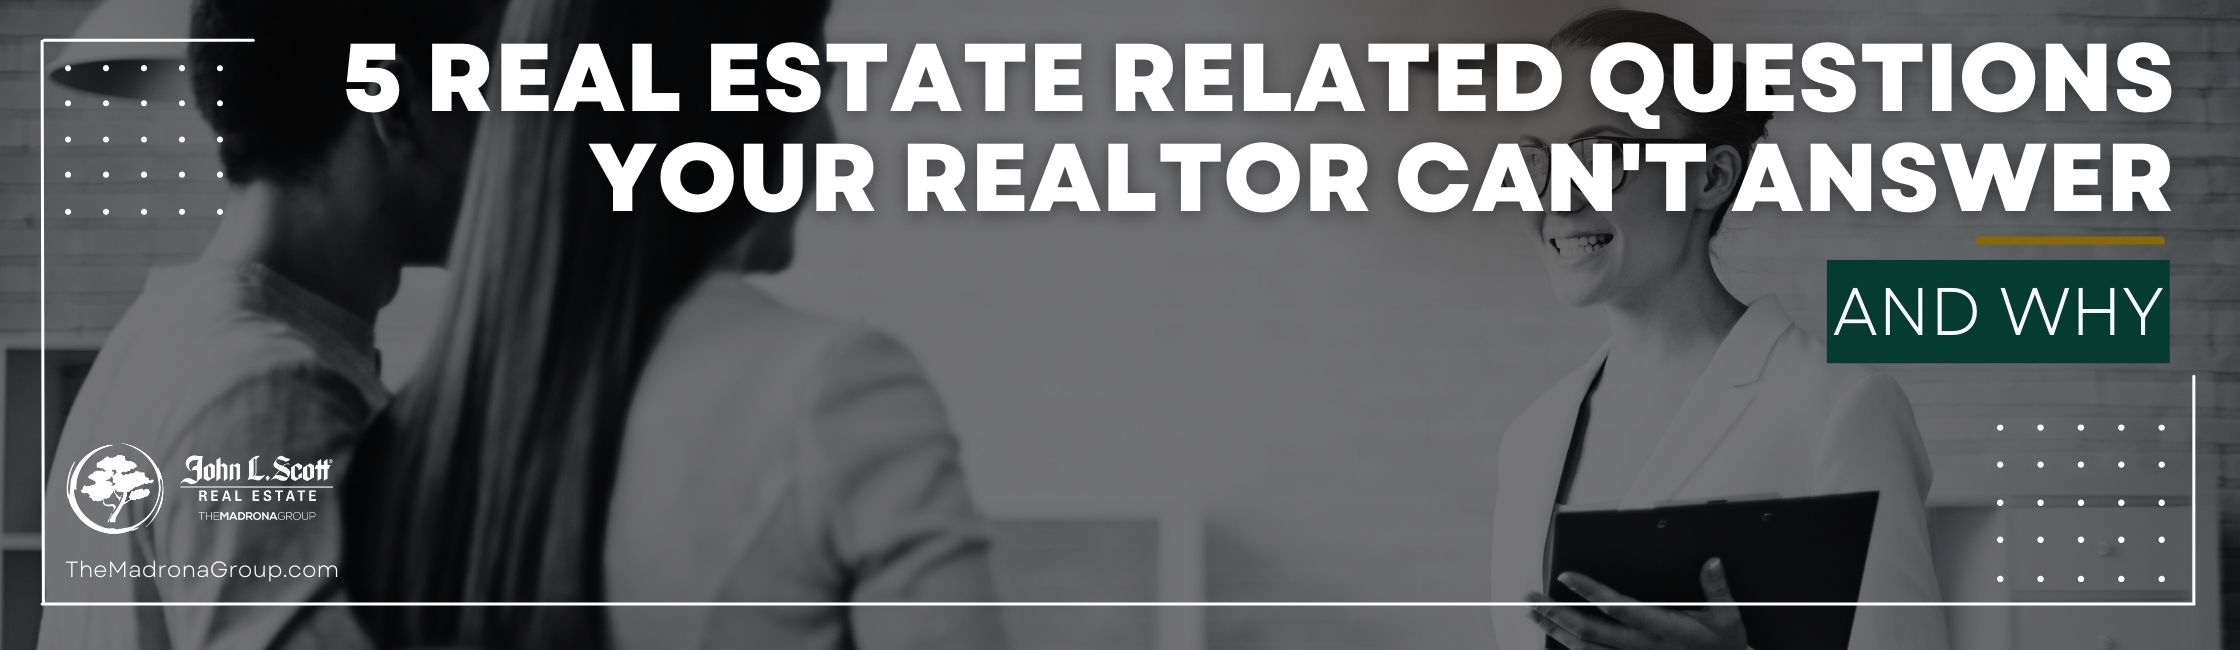 5 Real Estate Related Questions Your Realtor Can't Answer